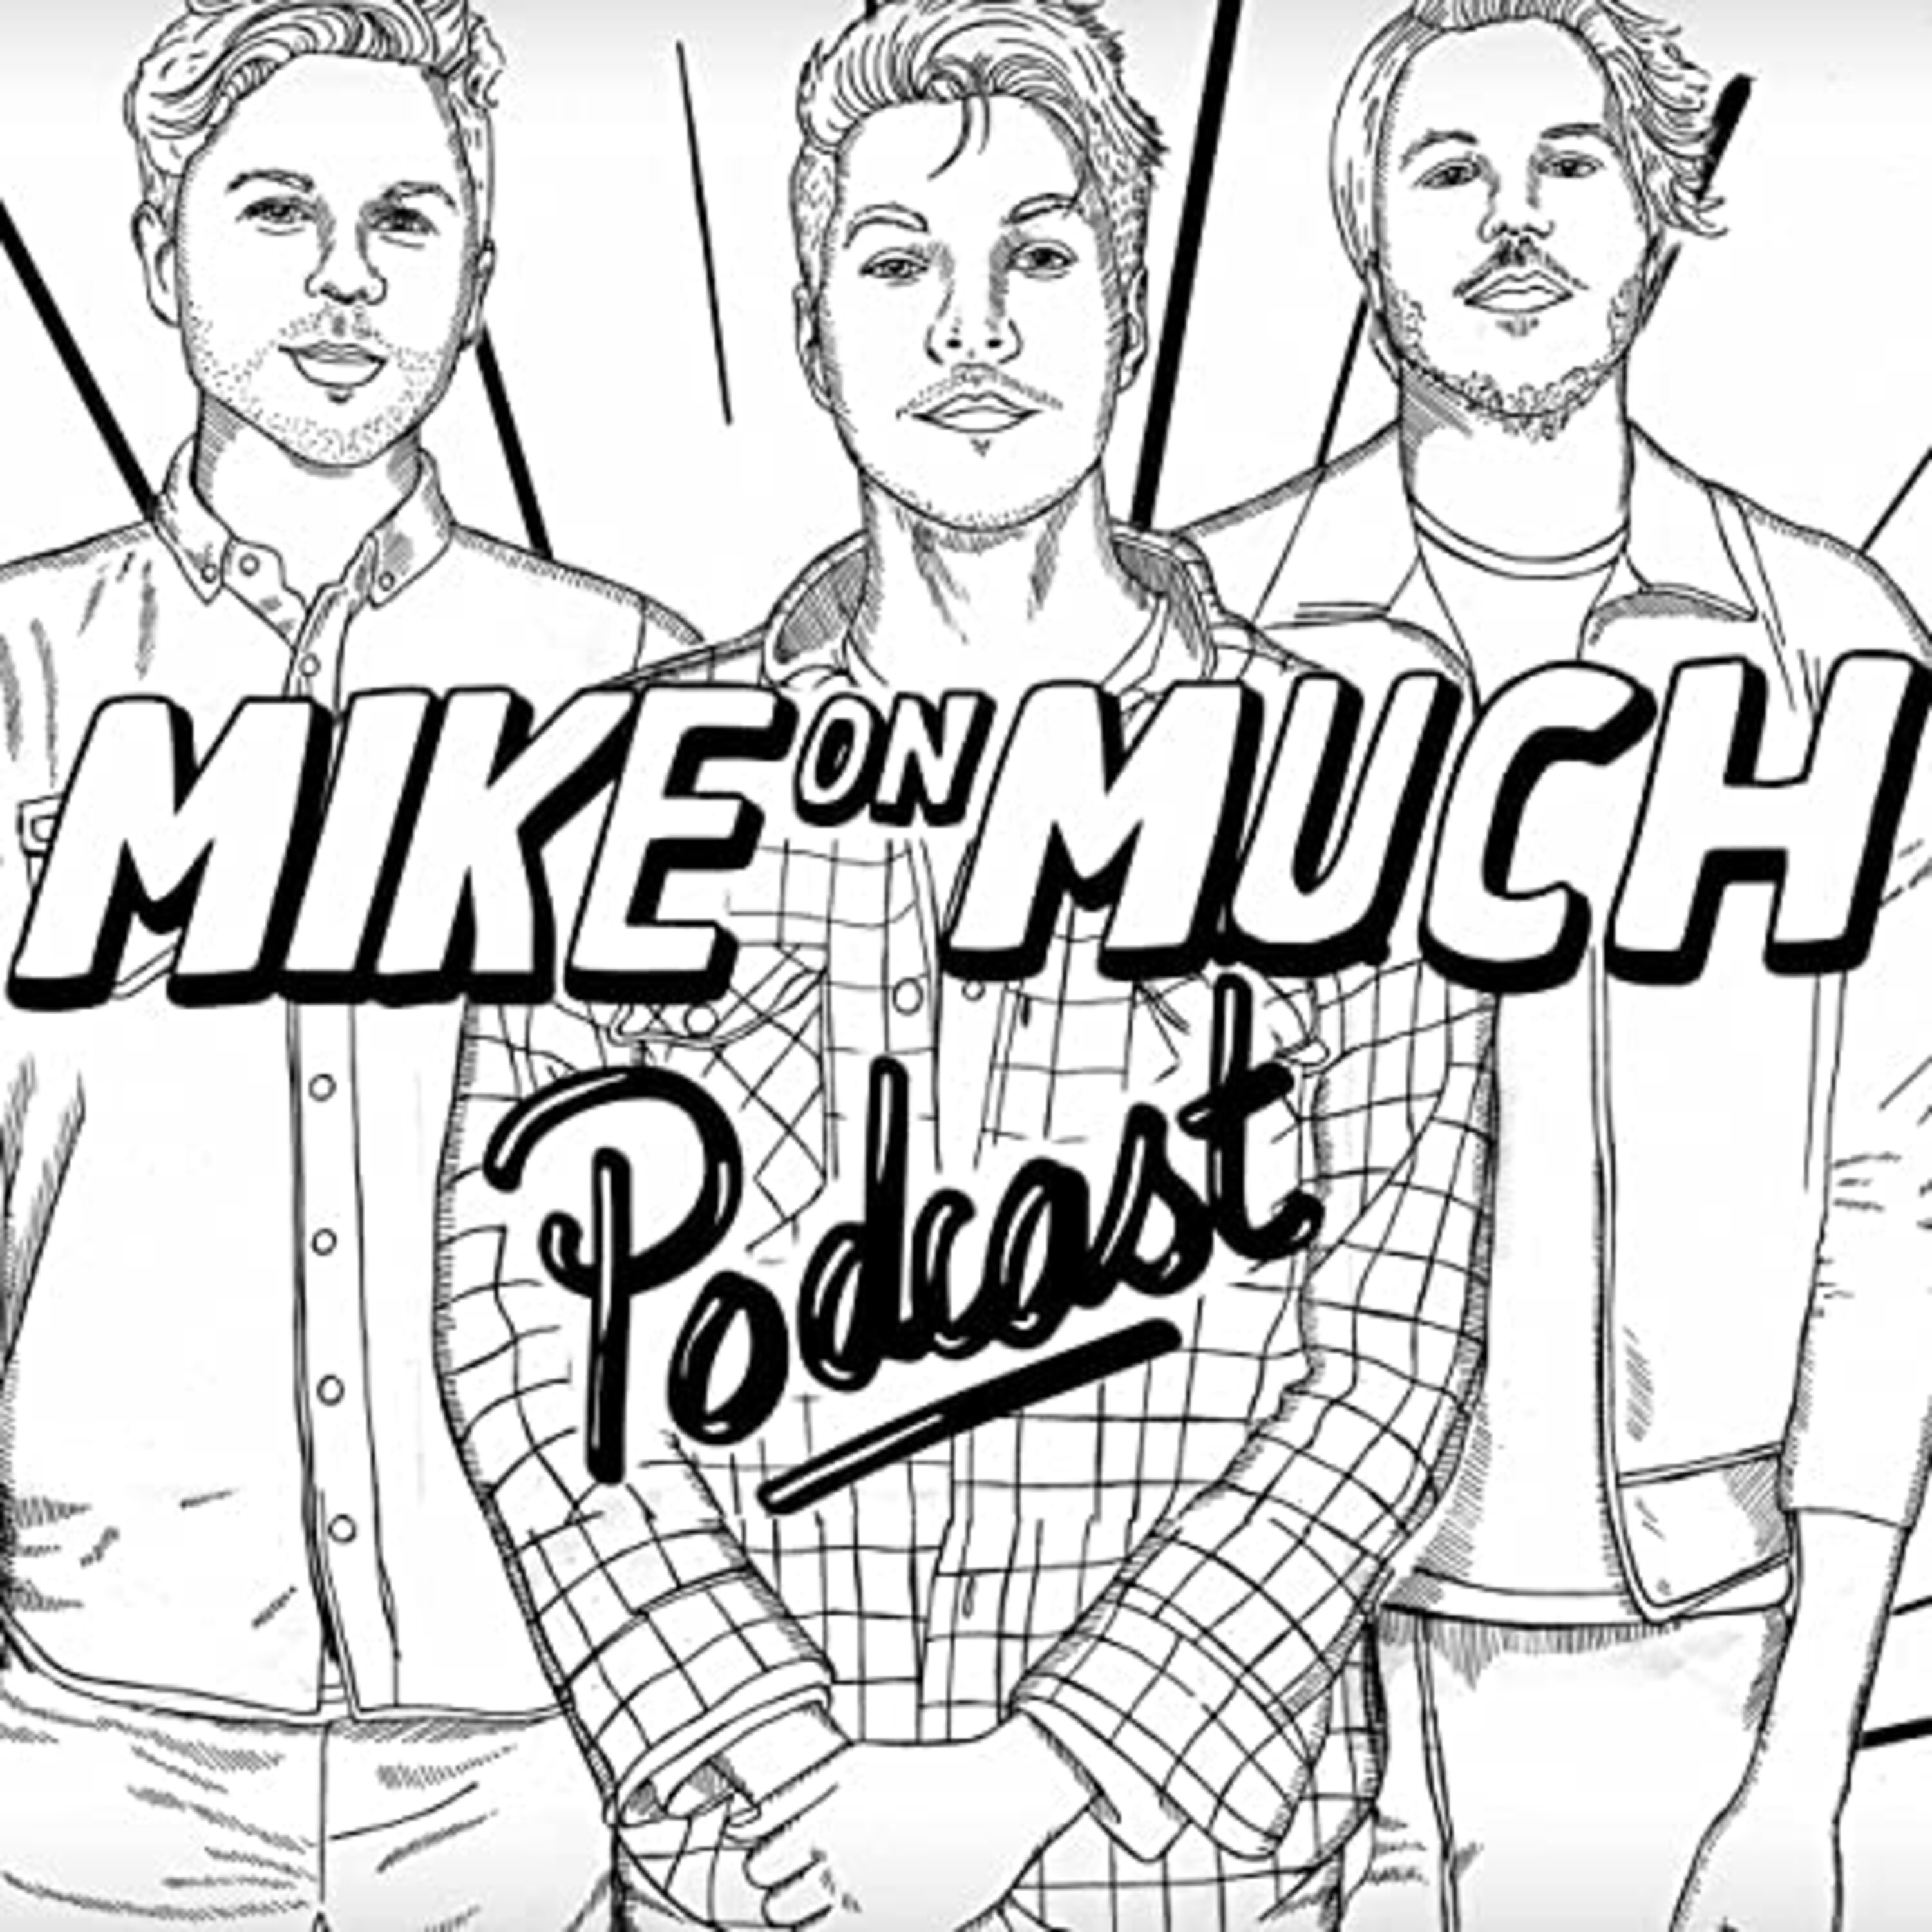 Season 1 Mike On Much: “Is Max Canada’s Uncle?”